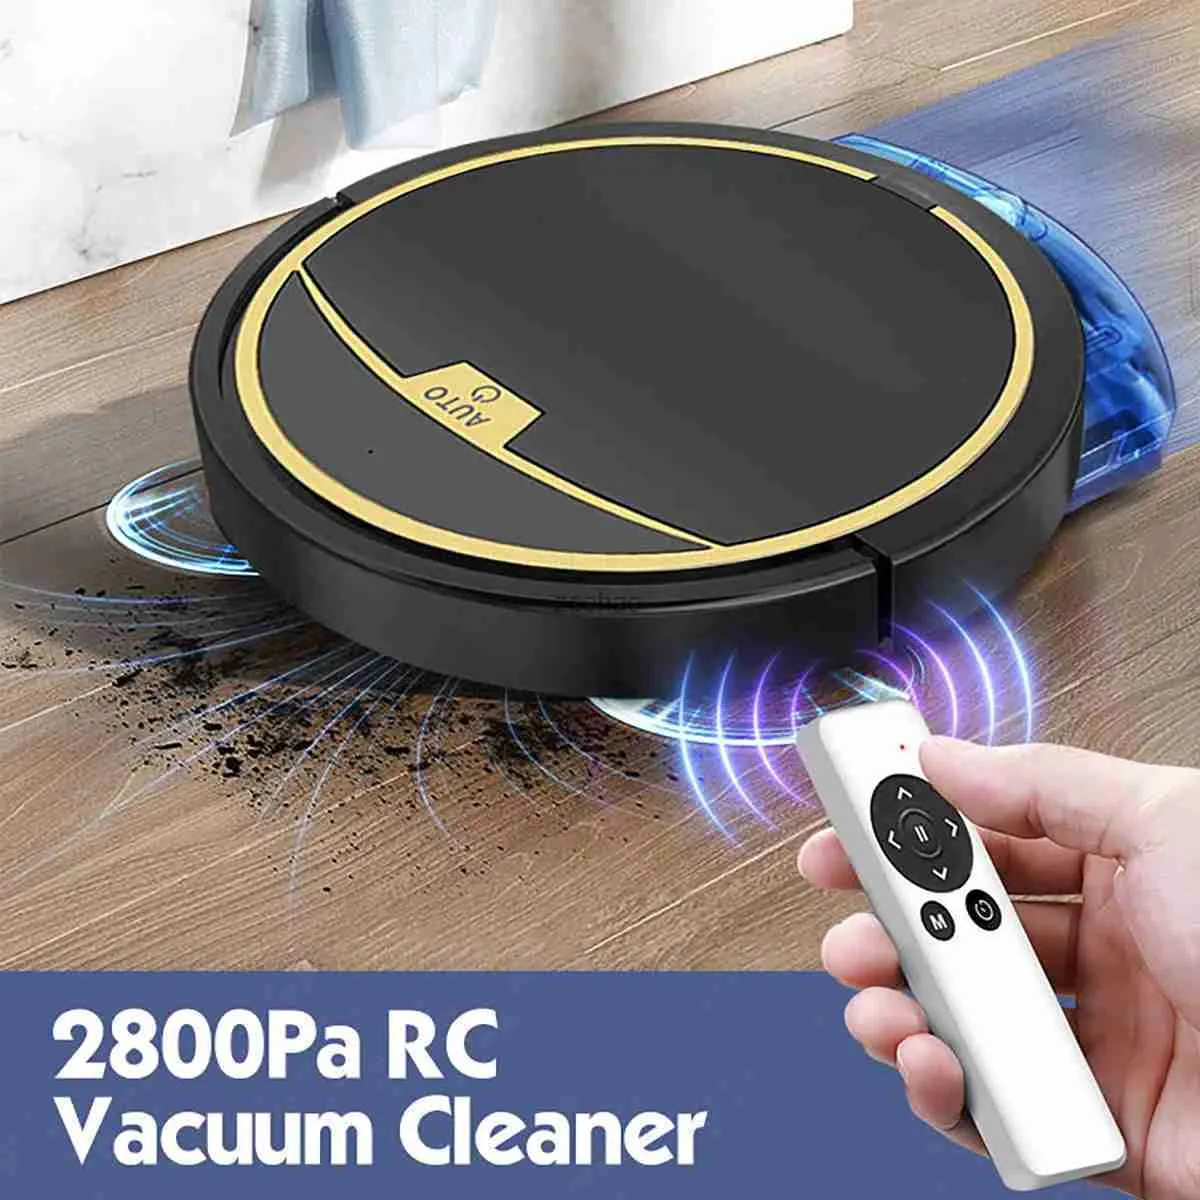 Robot Vacuum Cleaners Household intelligent Wet and dry remote control automatic sweeping mopping robot vacuum cleaner